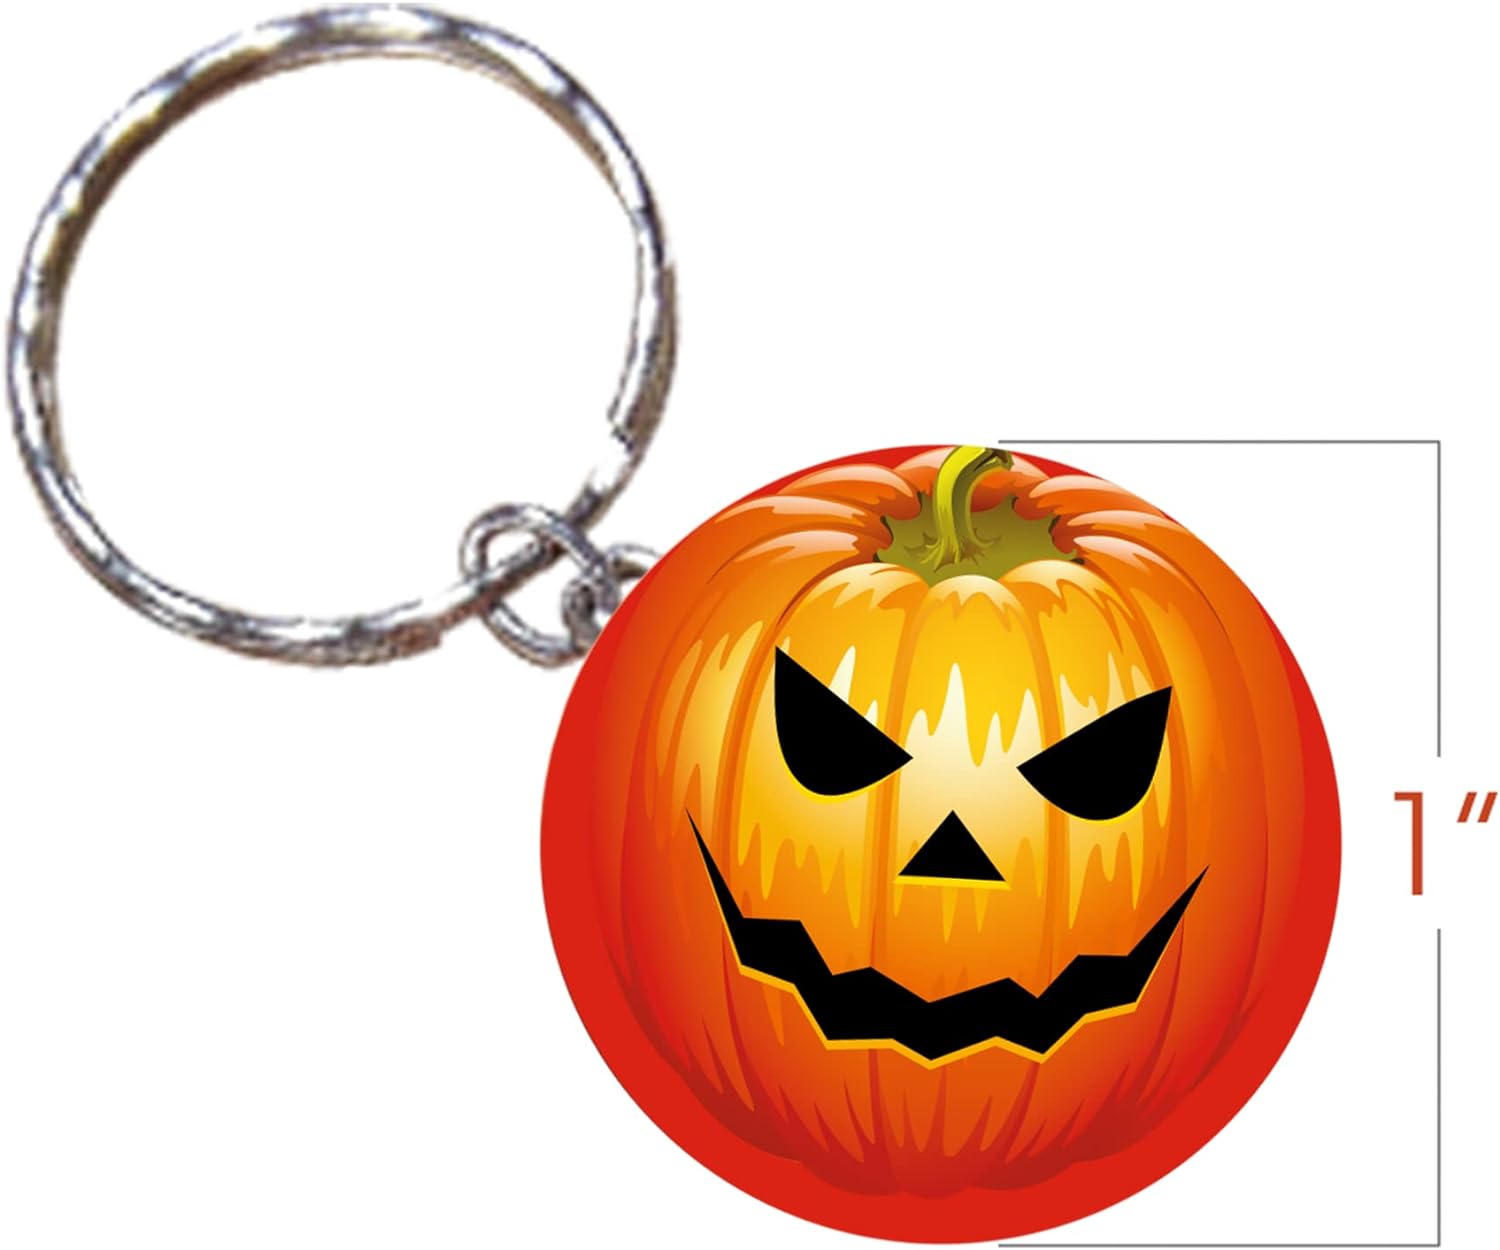 ArtCreativity Halloween Keychain Assortment, Set of 36, Metal Keychains in Assorted Designs, Great as Halloween Party Favors, Halloween Gifts, Teacher’s Awards, Non-Candy Trick or Treat Supplies